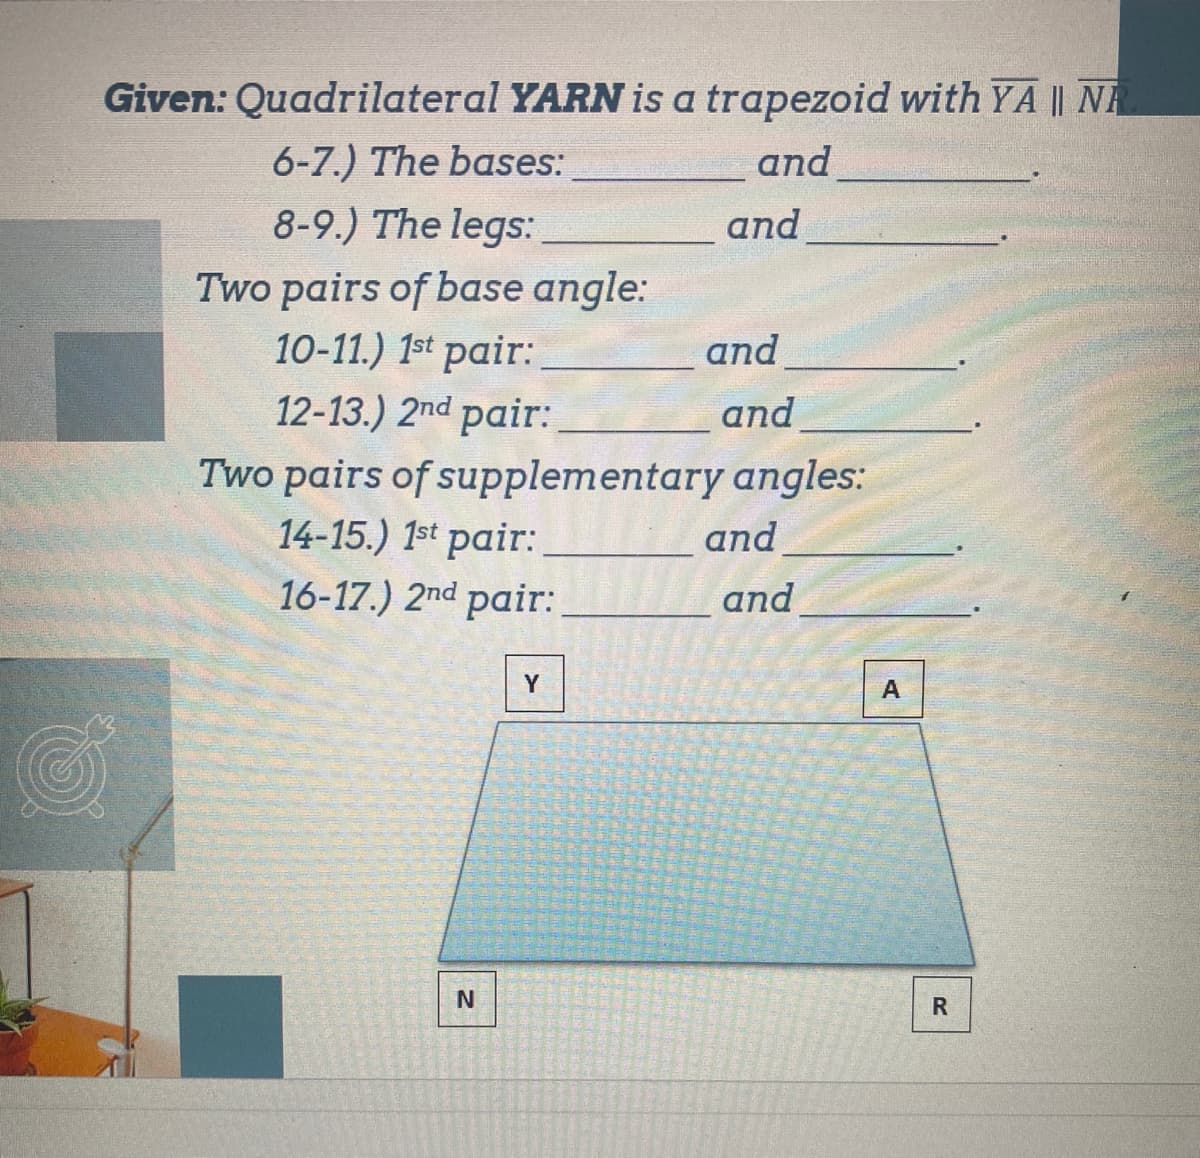 Given: Quadrilateral YARN is a trapezoid with YA || NR
6-7.) The bases:
and
8-9.) The legs:
Two pairs of base angle:
10-11.) 1st pair:
12-13.) 2nd pair:
and
Two pairs of supplementary angles:
14-15.) 1st pair:
and
16-17.) 2nd pair:
Y
N
and
and
and
A
R